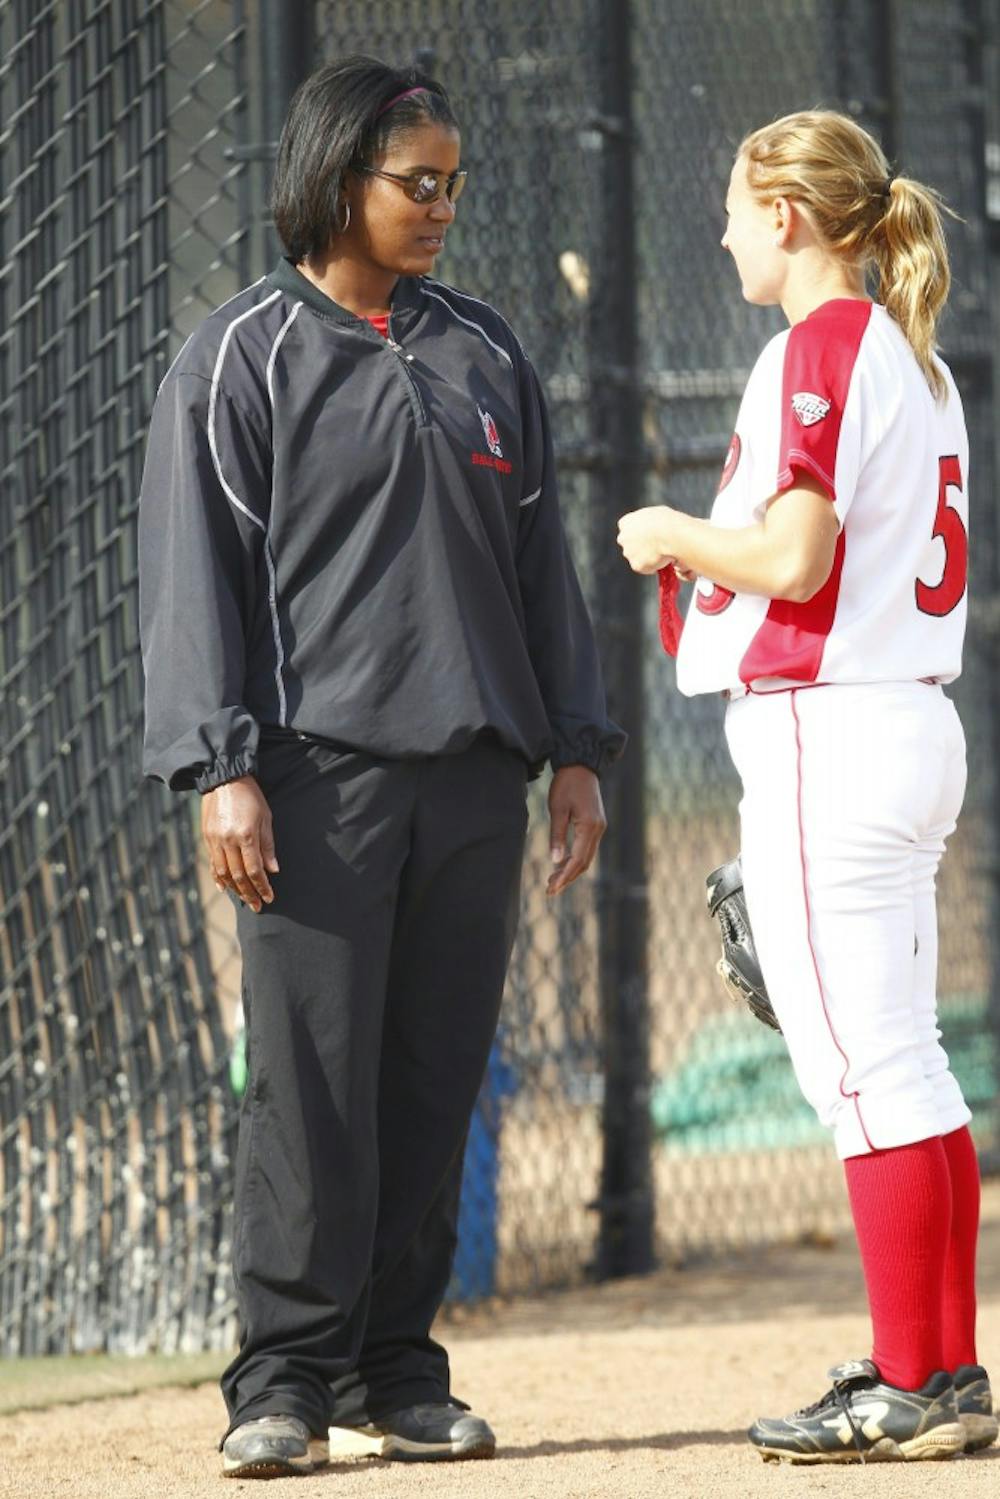 Head coach Tyra Perry speaks with outfielder Loren Cihlar during a practice. Perry inherited a team that finished 18-3 in the MAC last season. PHOTO PROVIDED ATHLETICS MEDIA RELATIONS